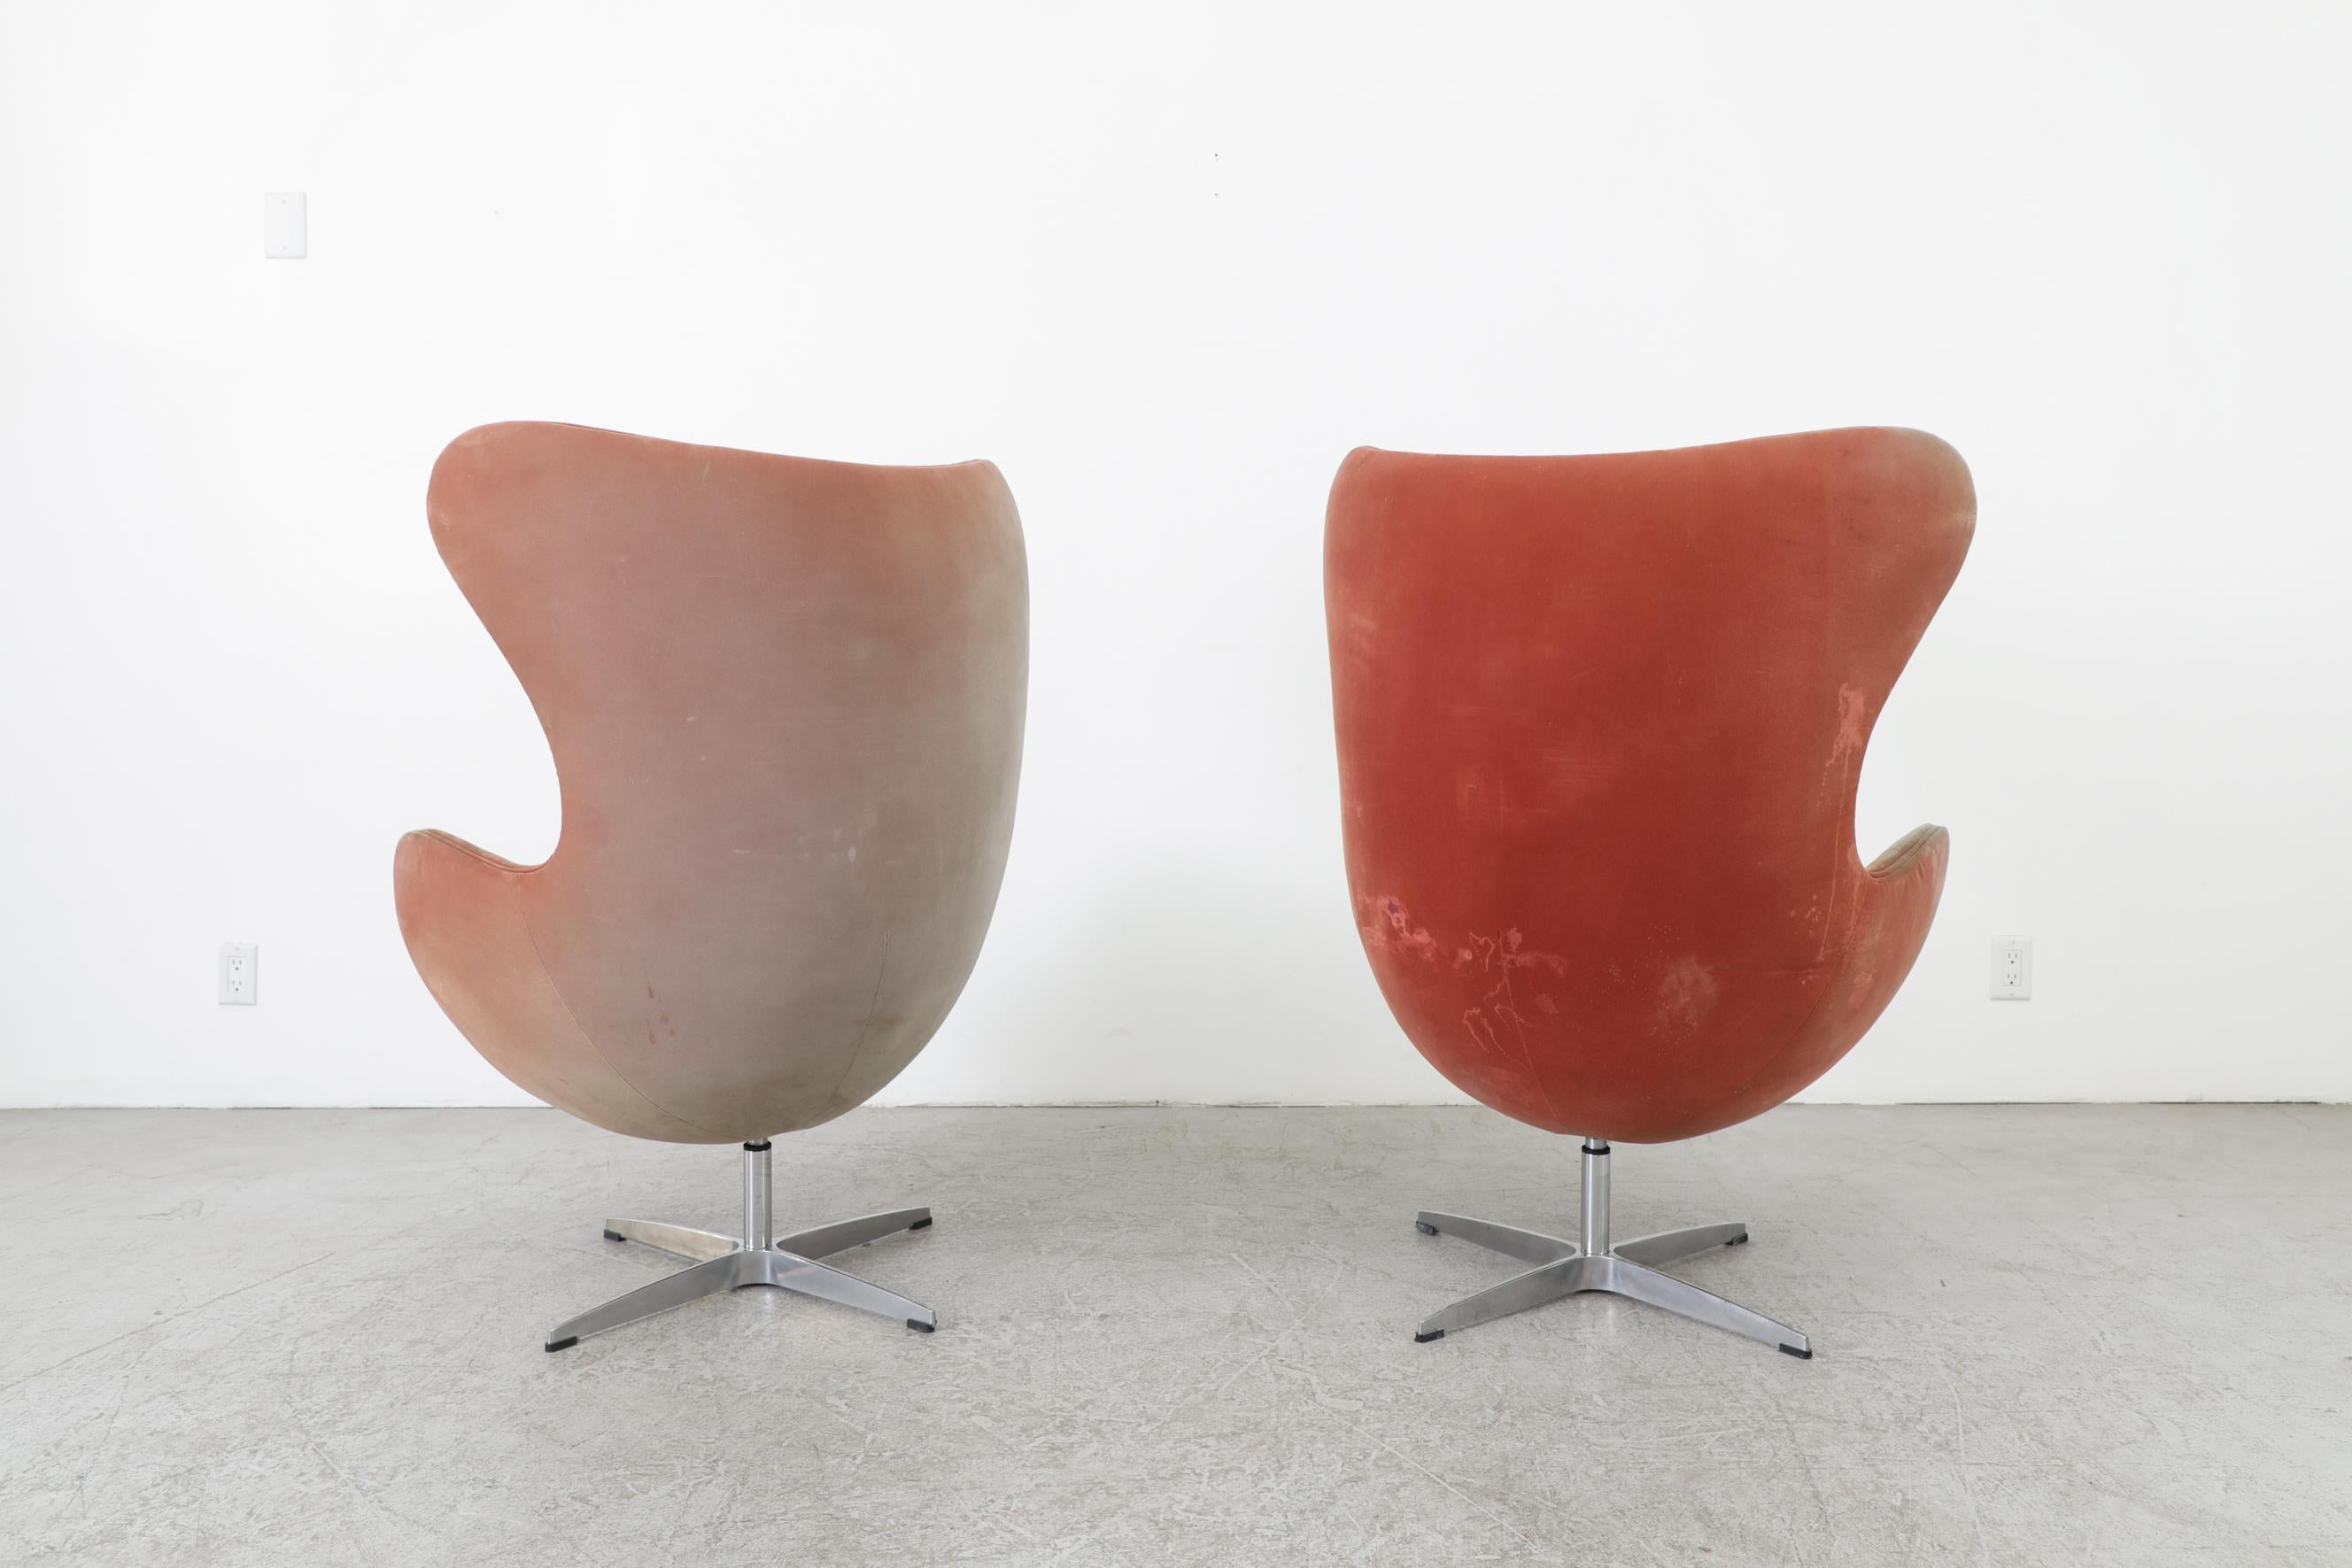 Chrome Pair of Original Arne Jacobsen (attributed) Egg Chairs, 1958